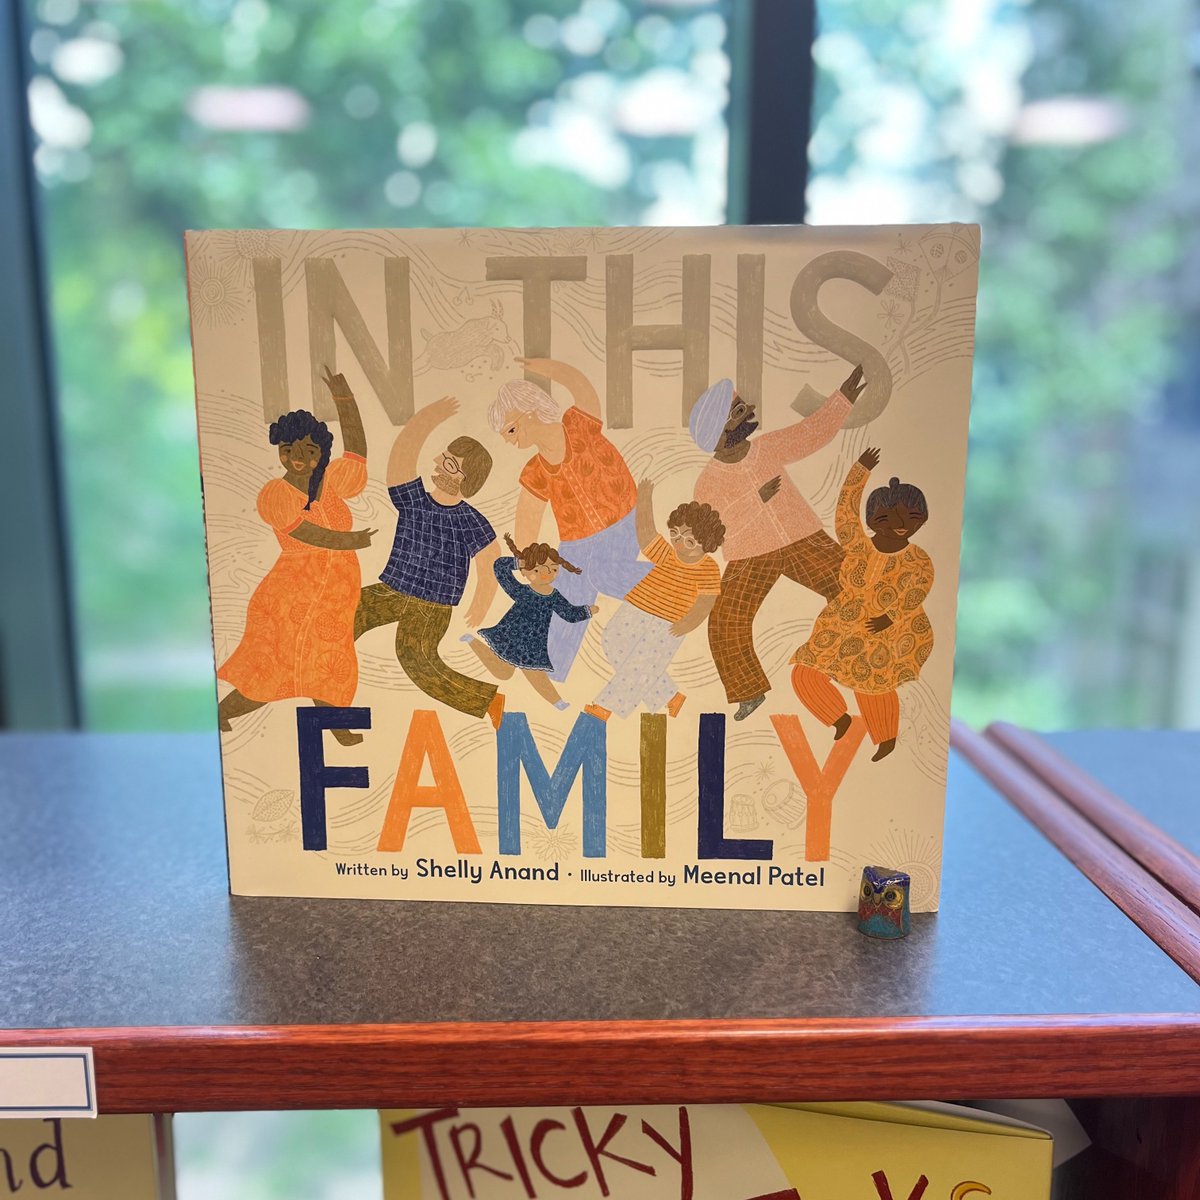 📚💓 In This Family by Shelly Anand and illustrated by Meenal Patel. #dailybutlershelfie #InThisFamily @maanandshelly #MeenalPatel @SimonKIDS